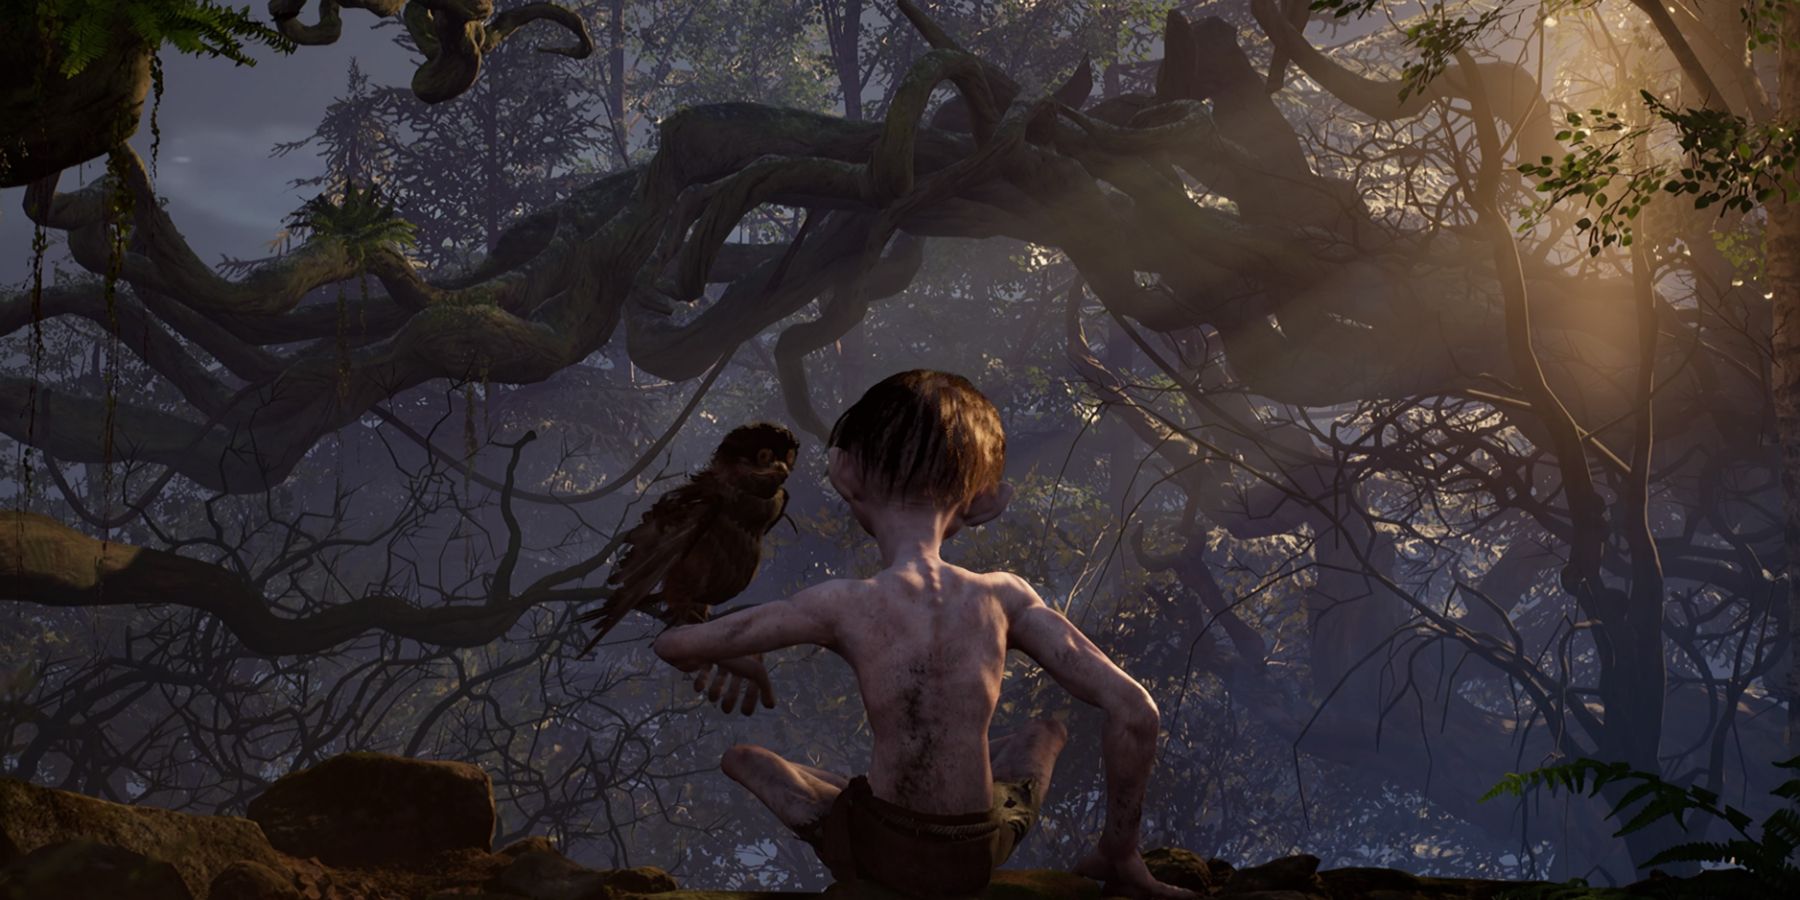 The little one sits on Gollum's arm in The Lord of the Rings: Gollum